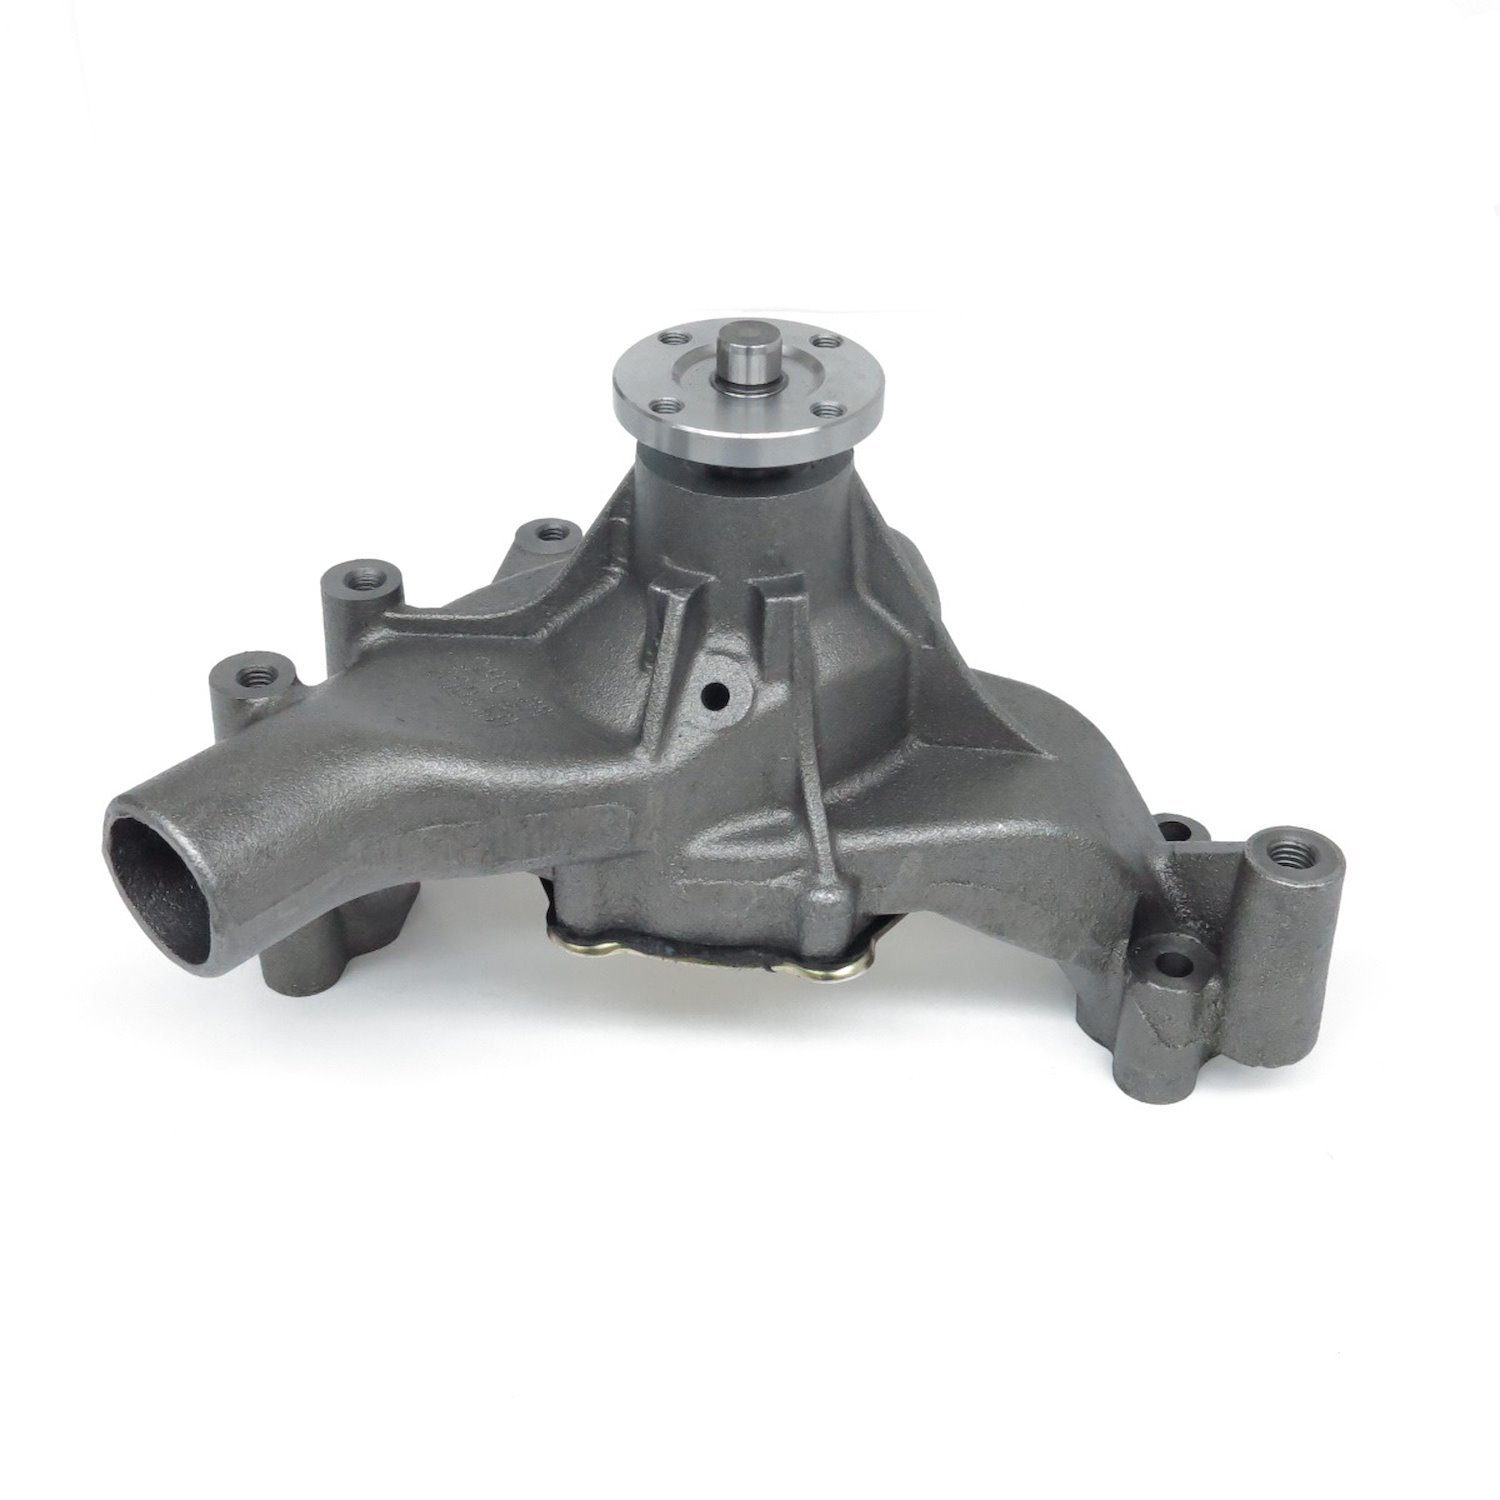 US Motor Works Water Pump for 1975-1991 Big Block Chevy 454ci (7.4L)